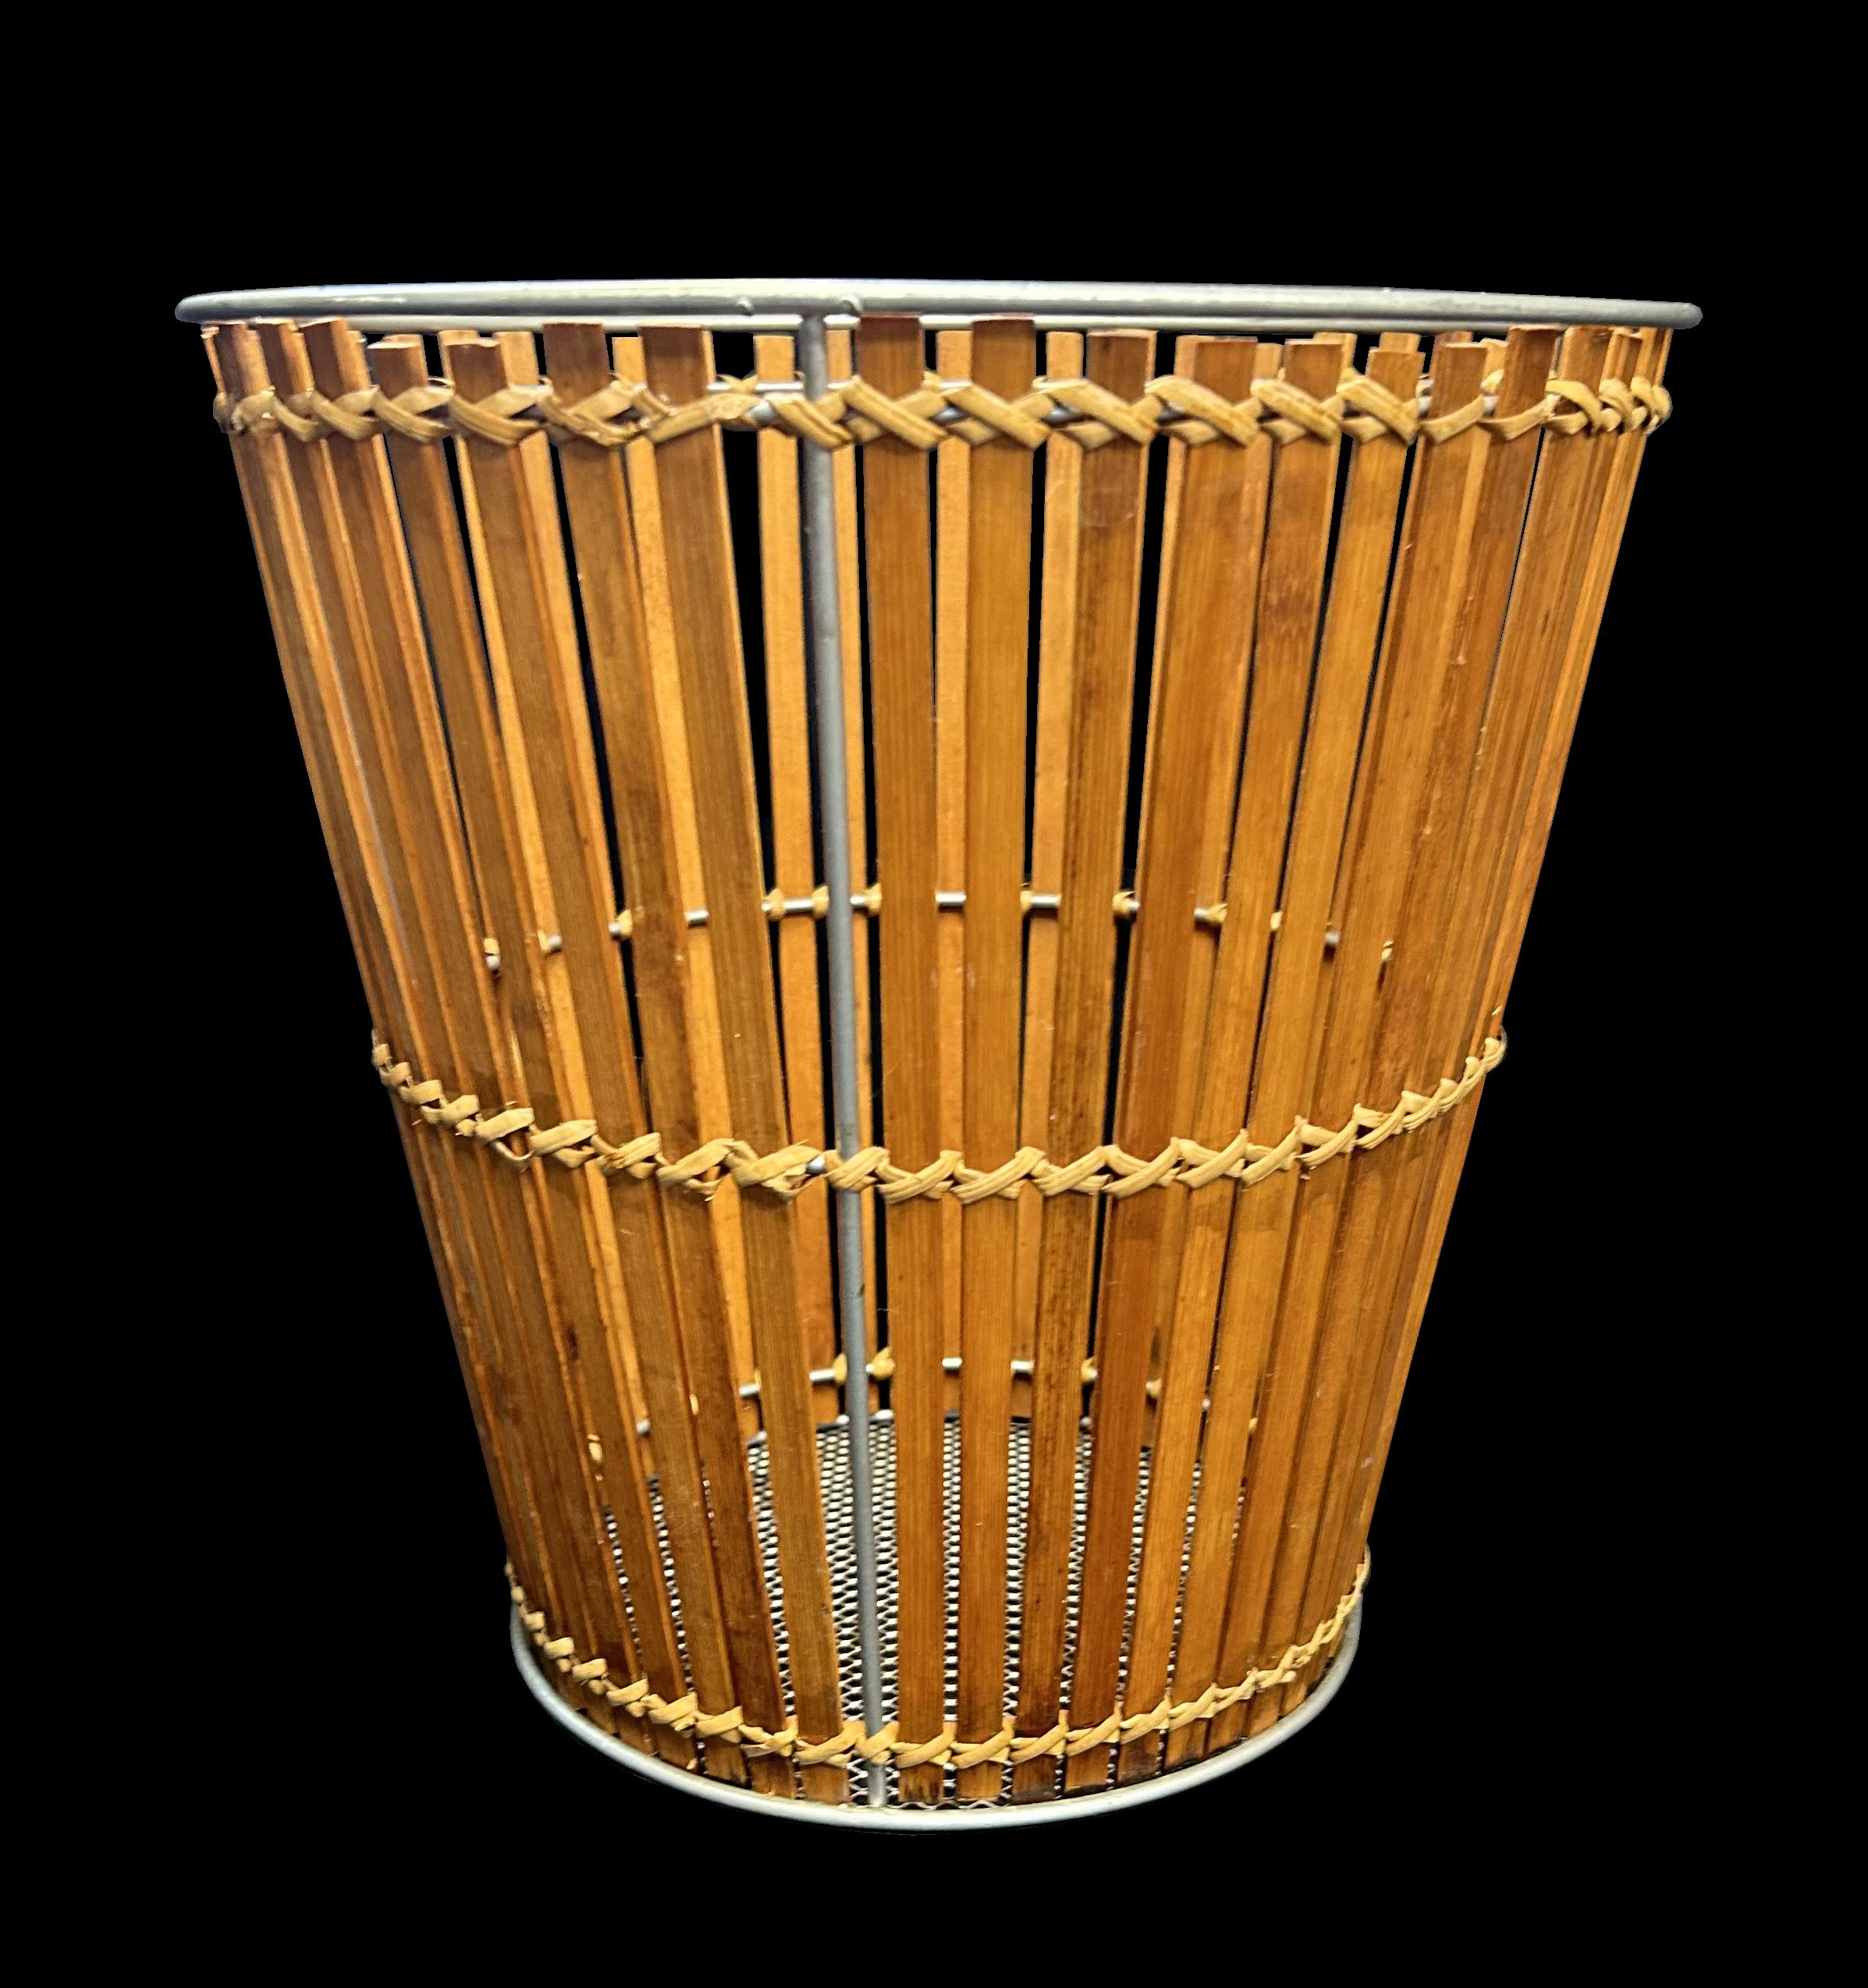 20th Century Slatted Bamboo and Rattan Waste Paper Basket